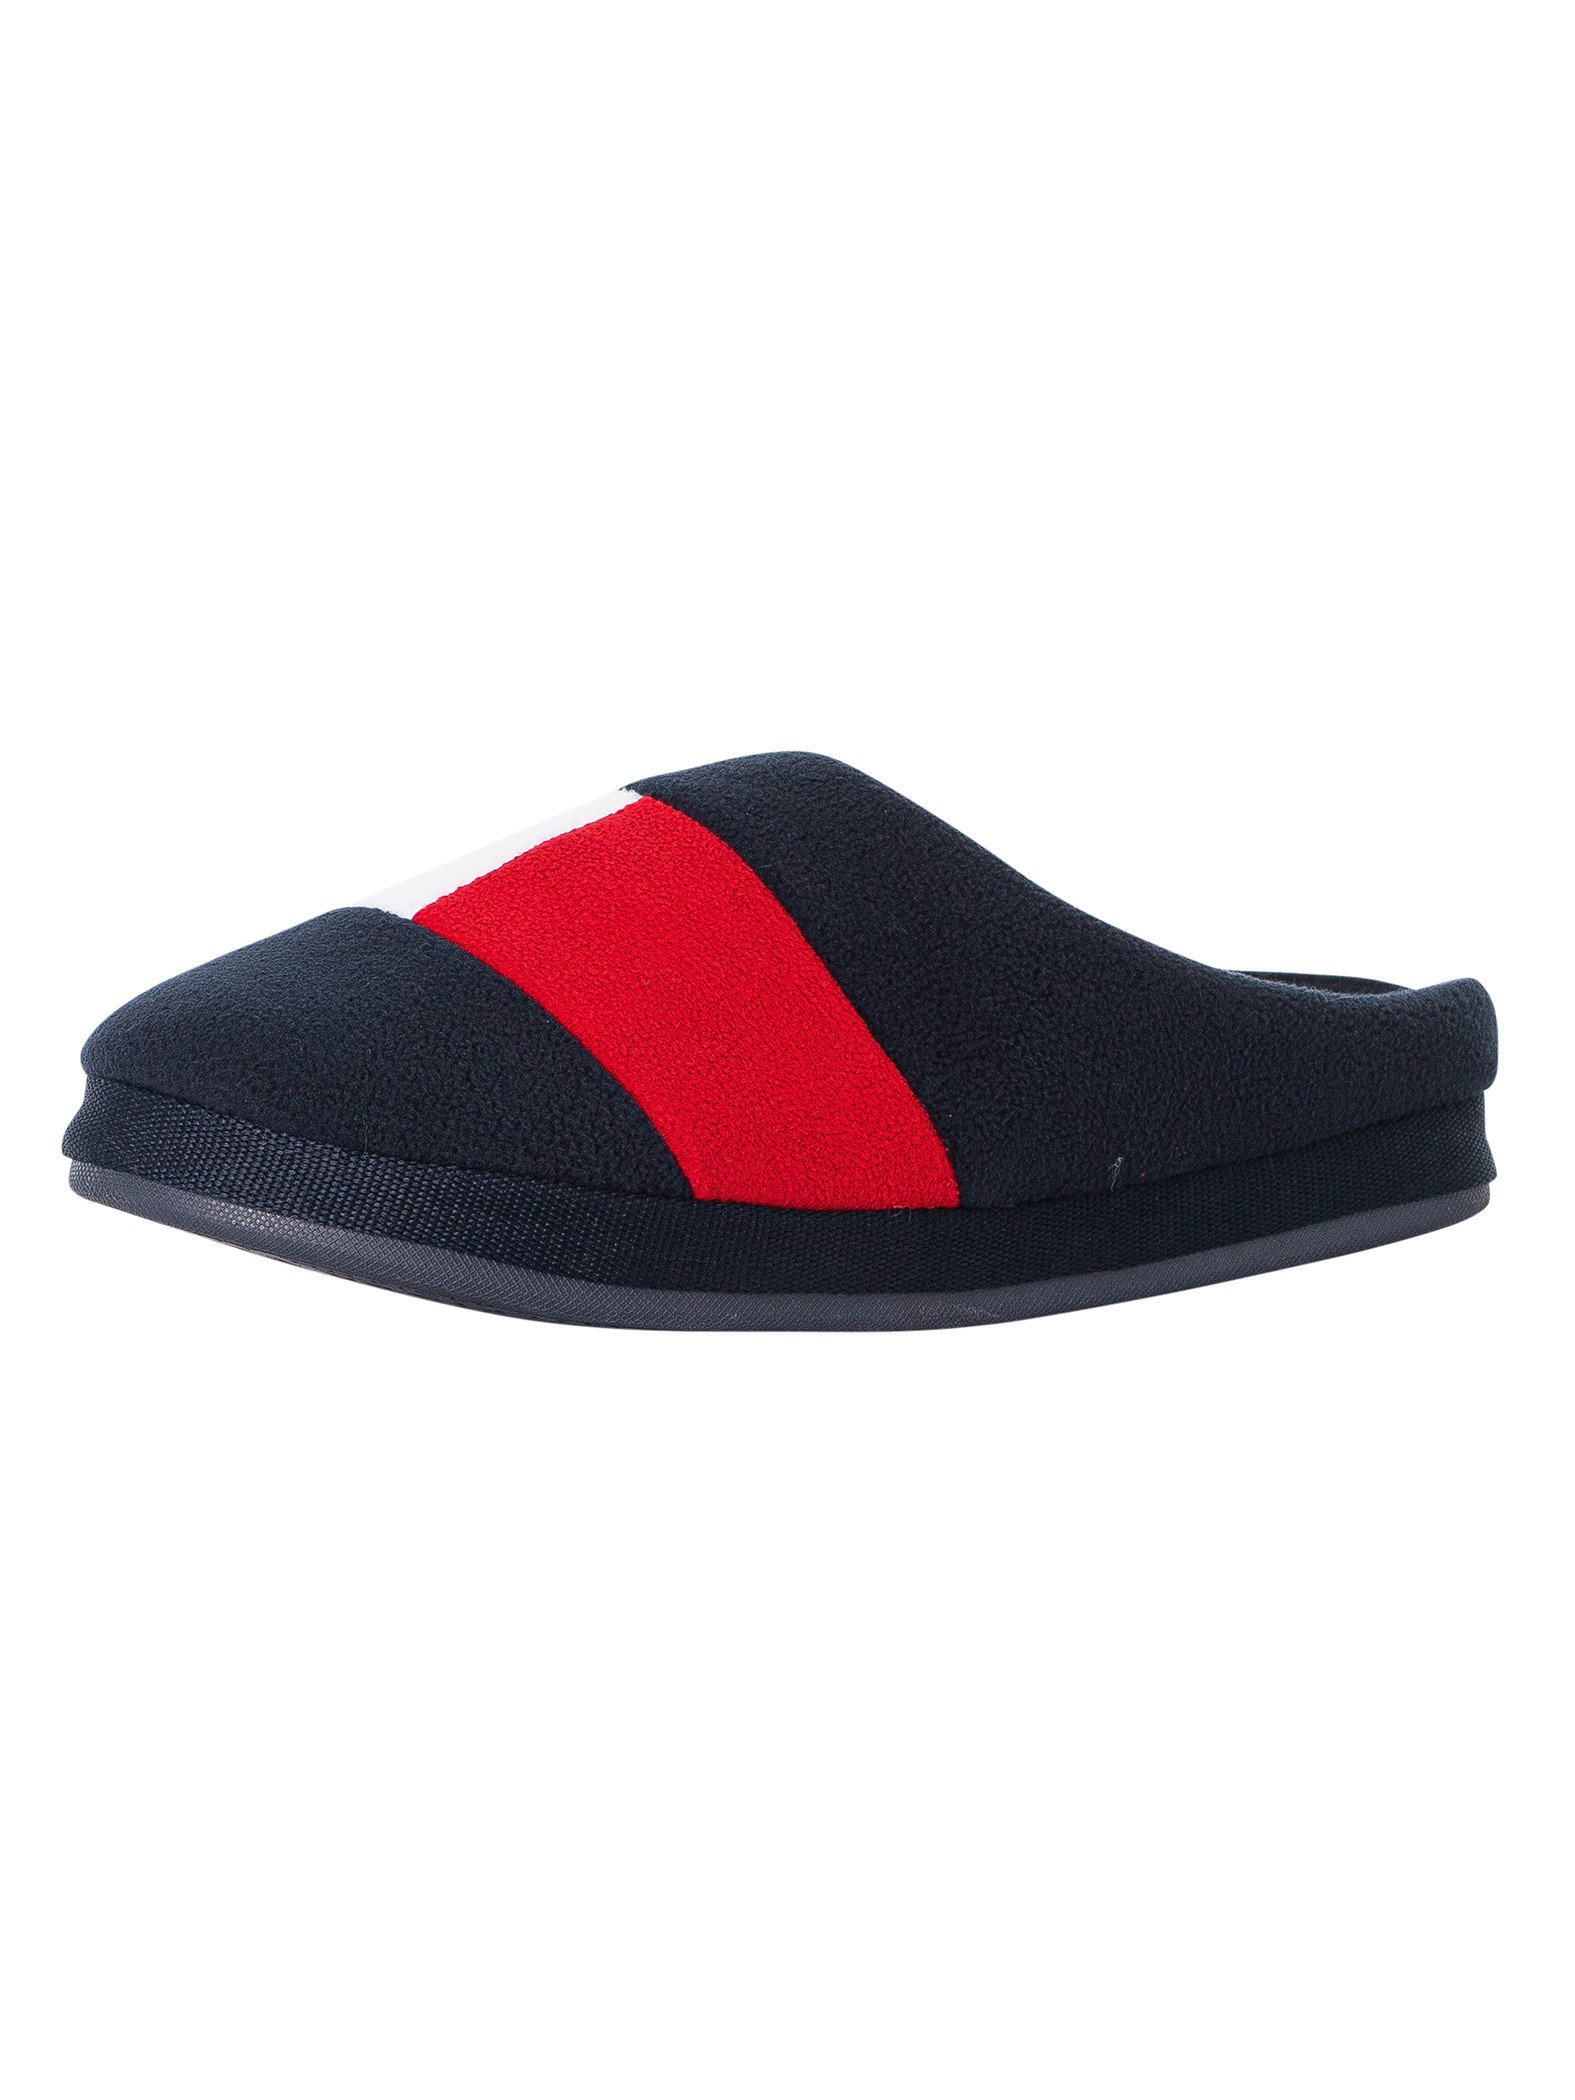 Flag Home Slippers product